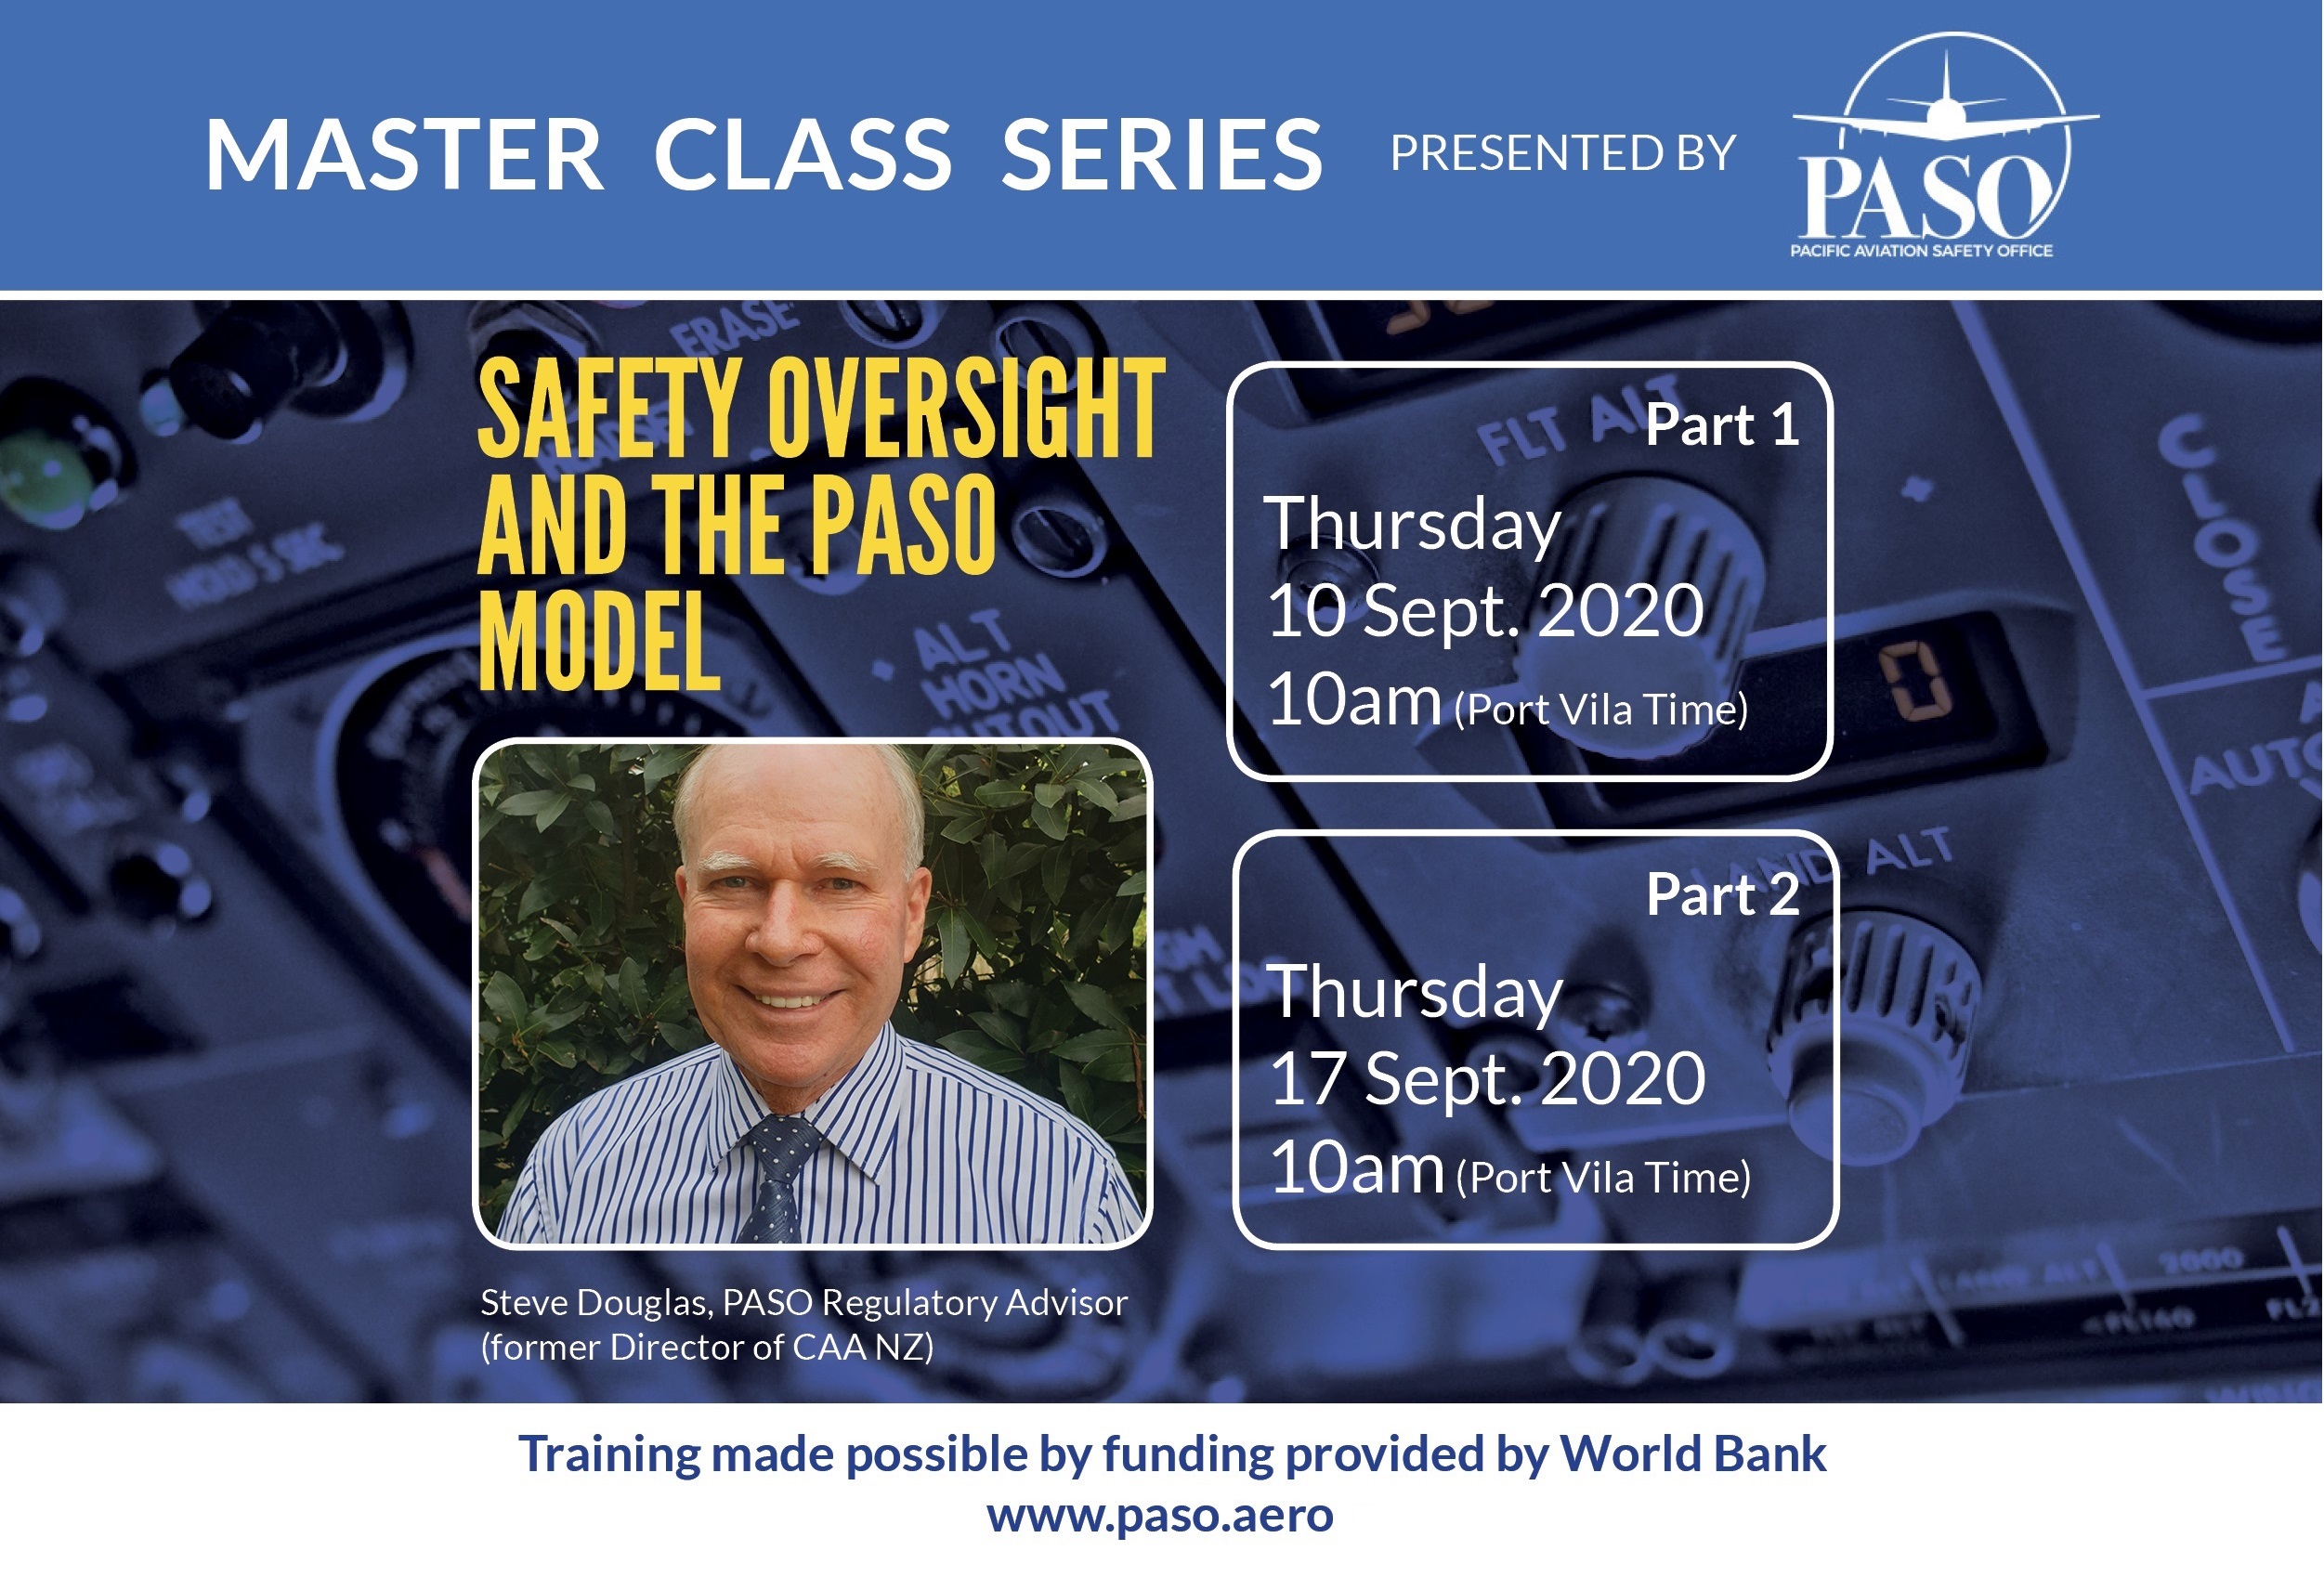 The PASO Master Class Series provides virtual technical training opportunities for Member States